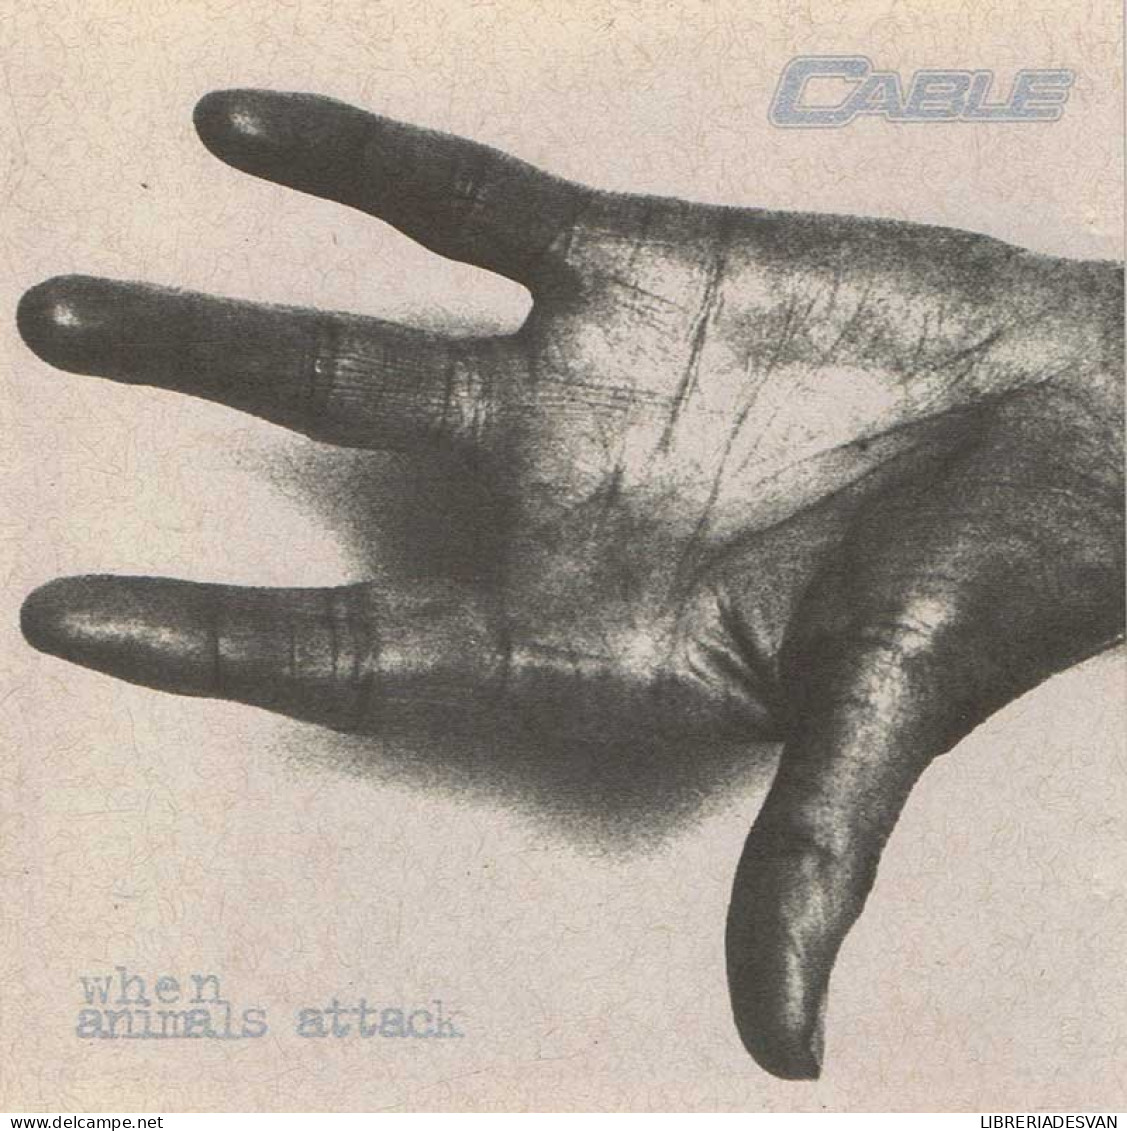 Cable - When Animals Attack. CD - Rock